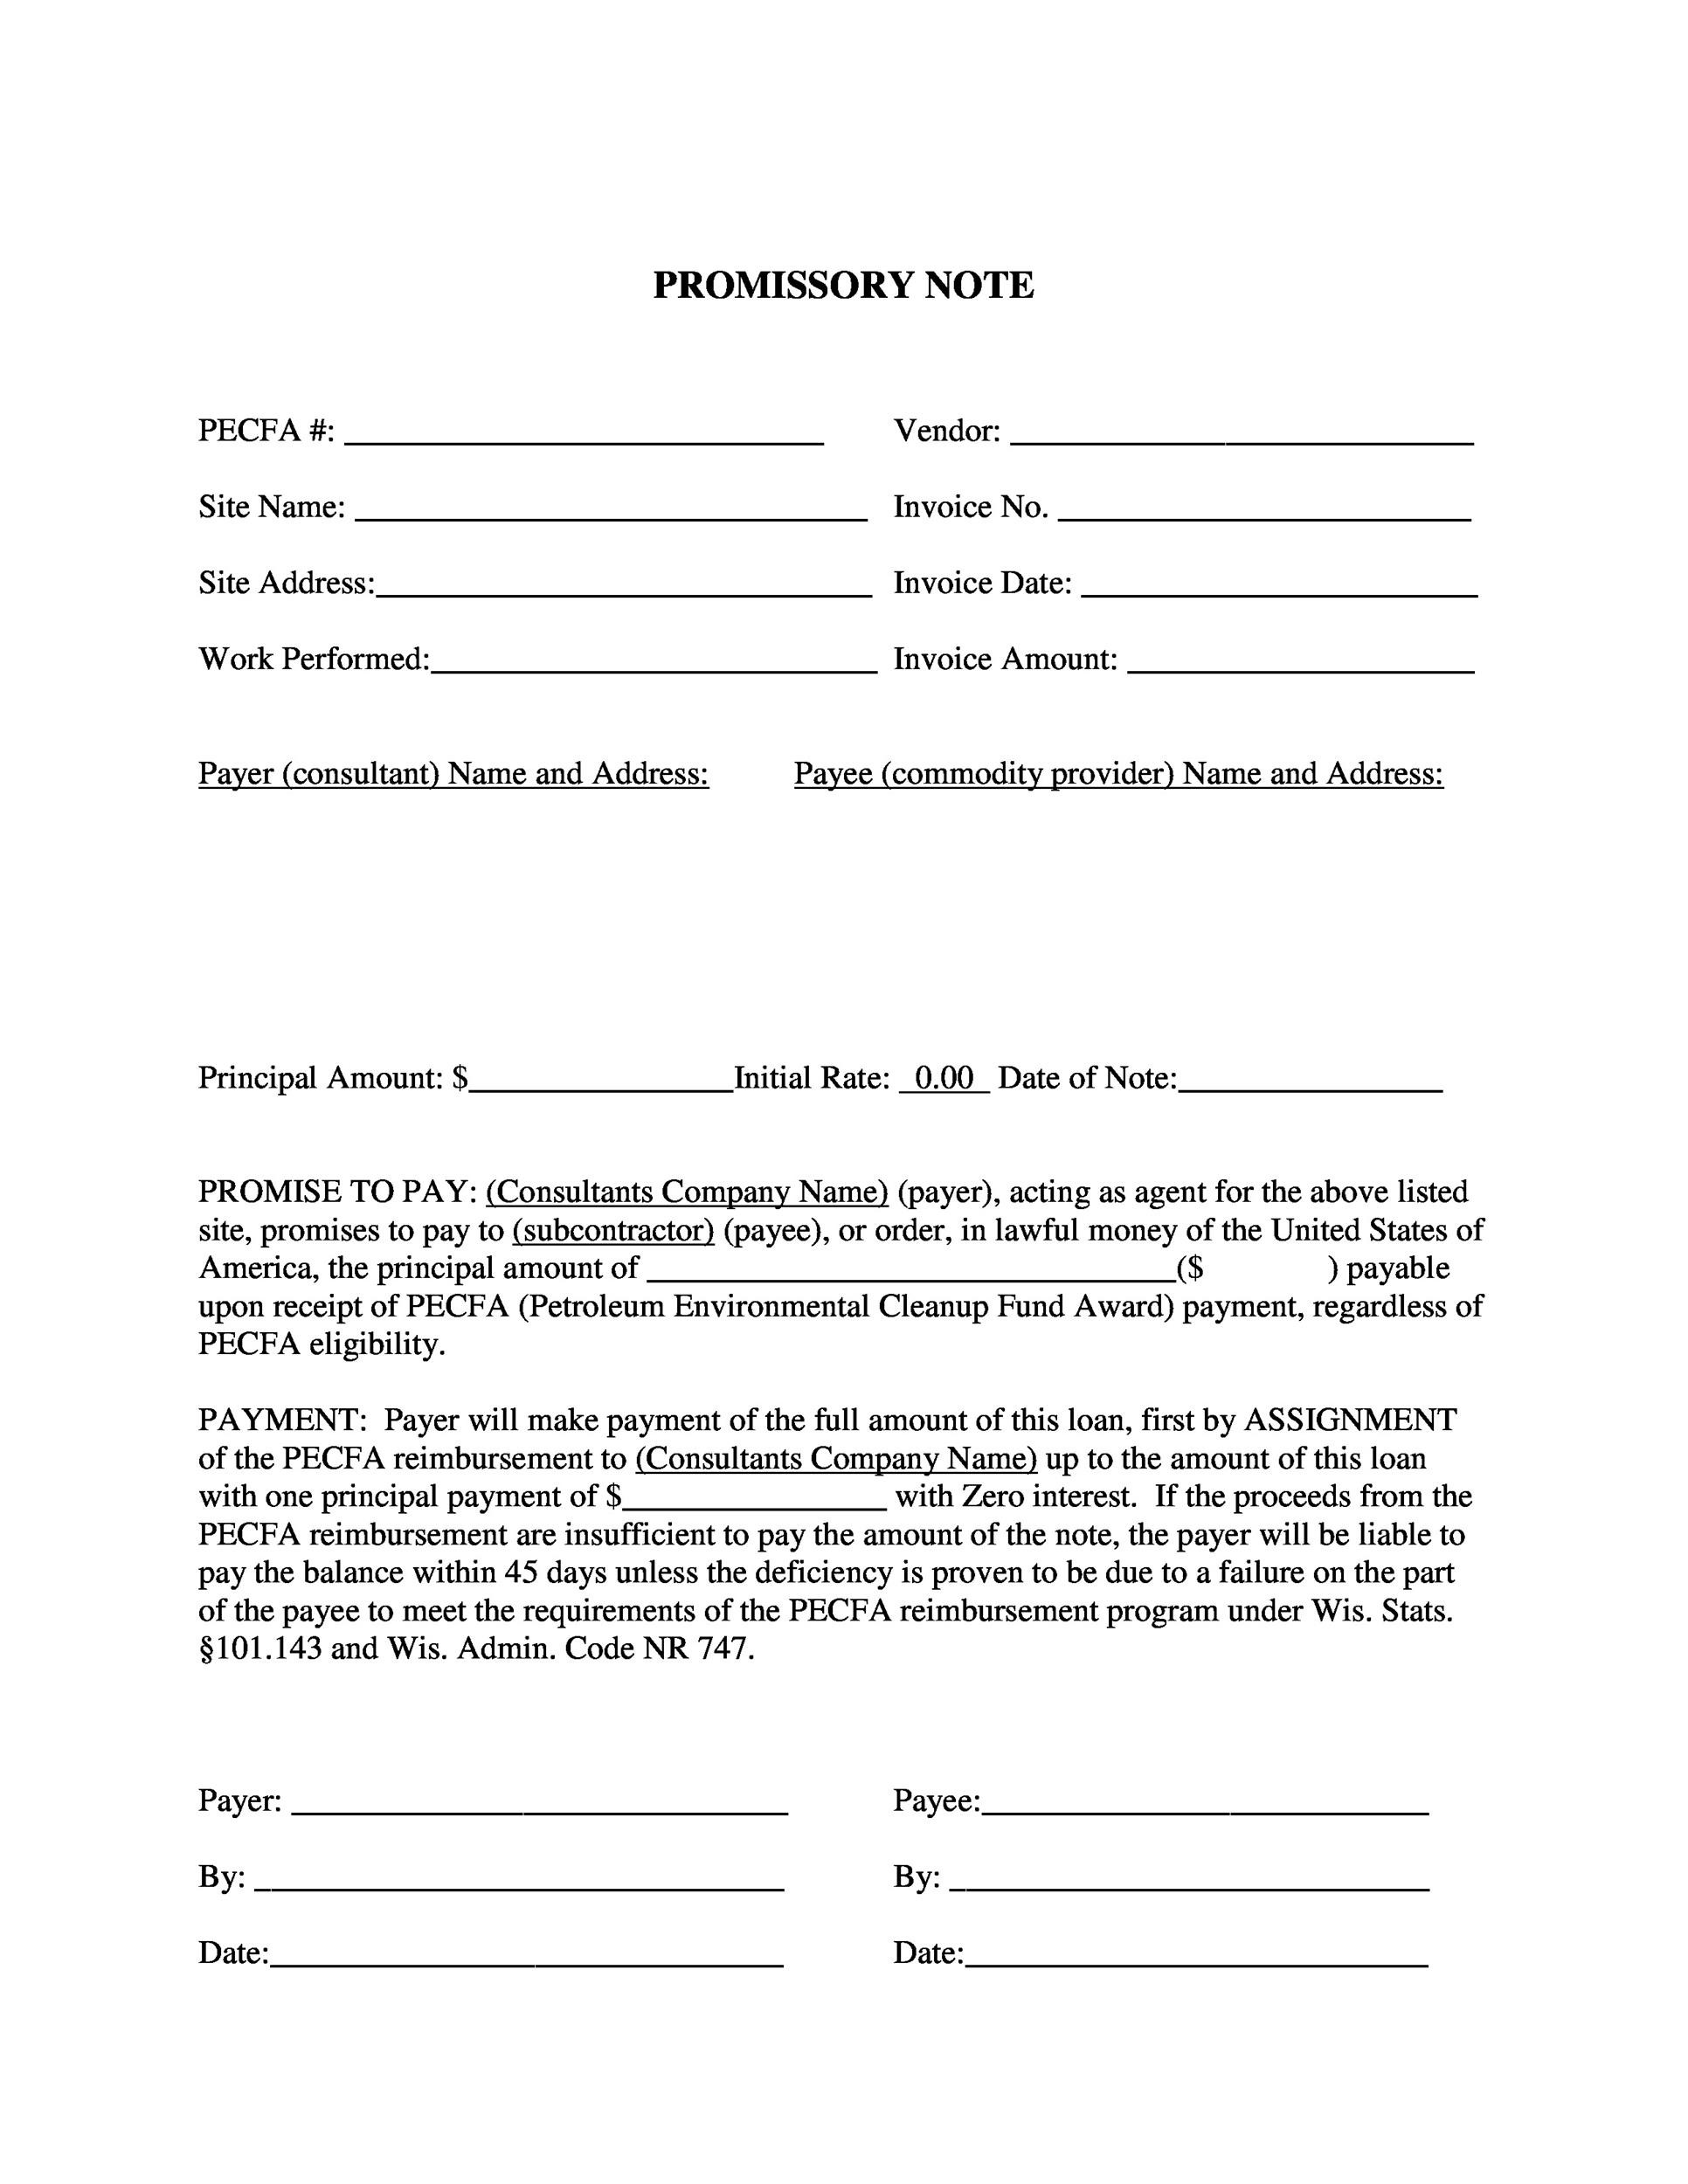 Investment Promissory Note Template